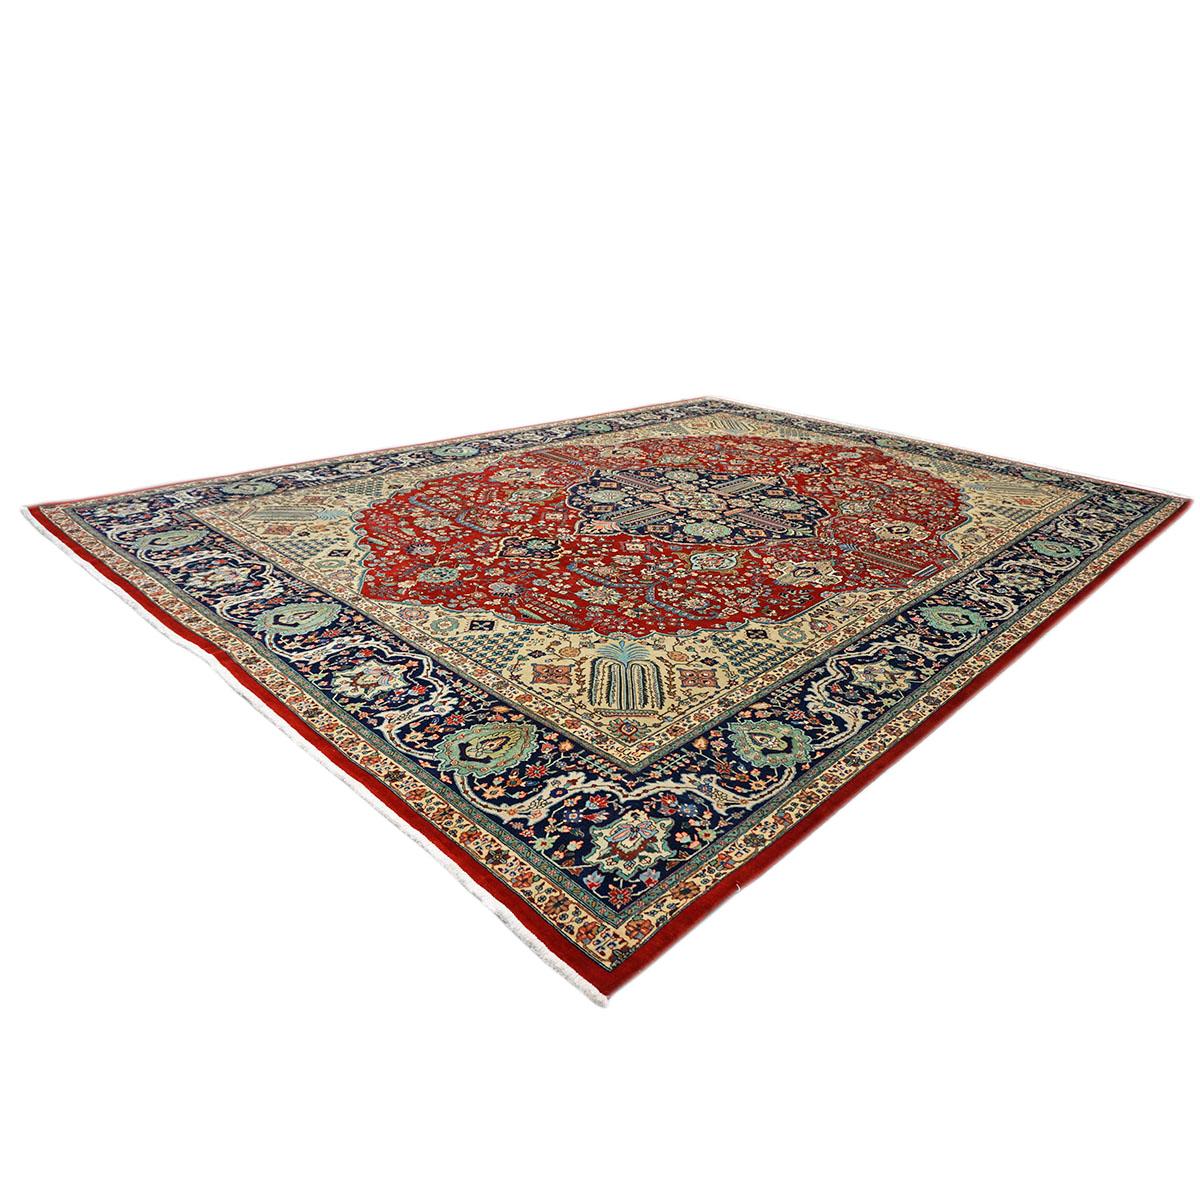 1930s Antique Persian Tabriz 9x13 Ivory, Red, & Navy Handmade Area Rug For Sale 1